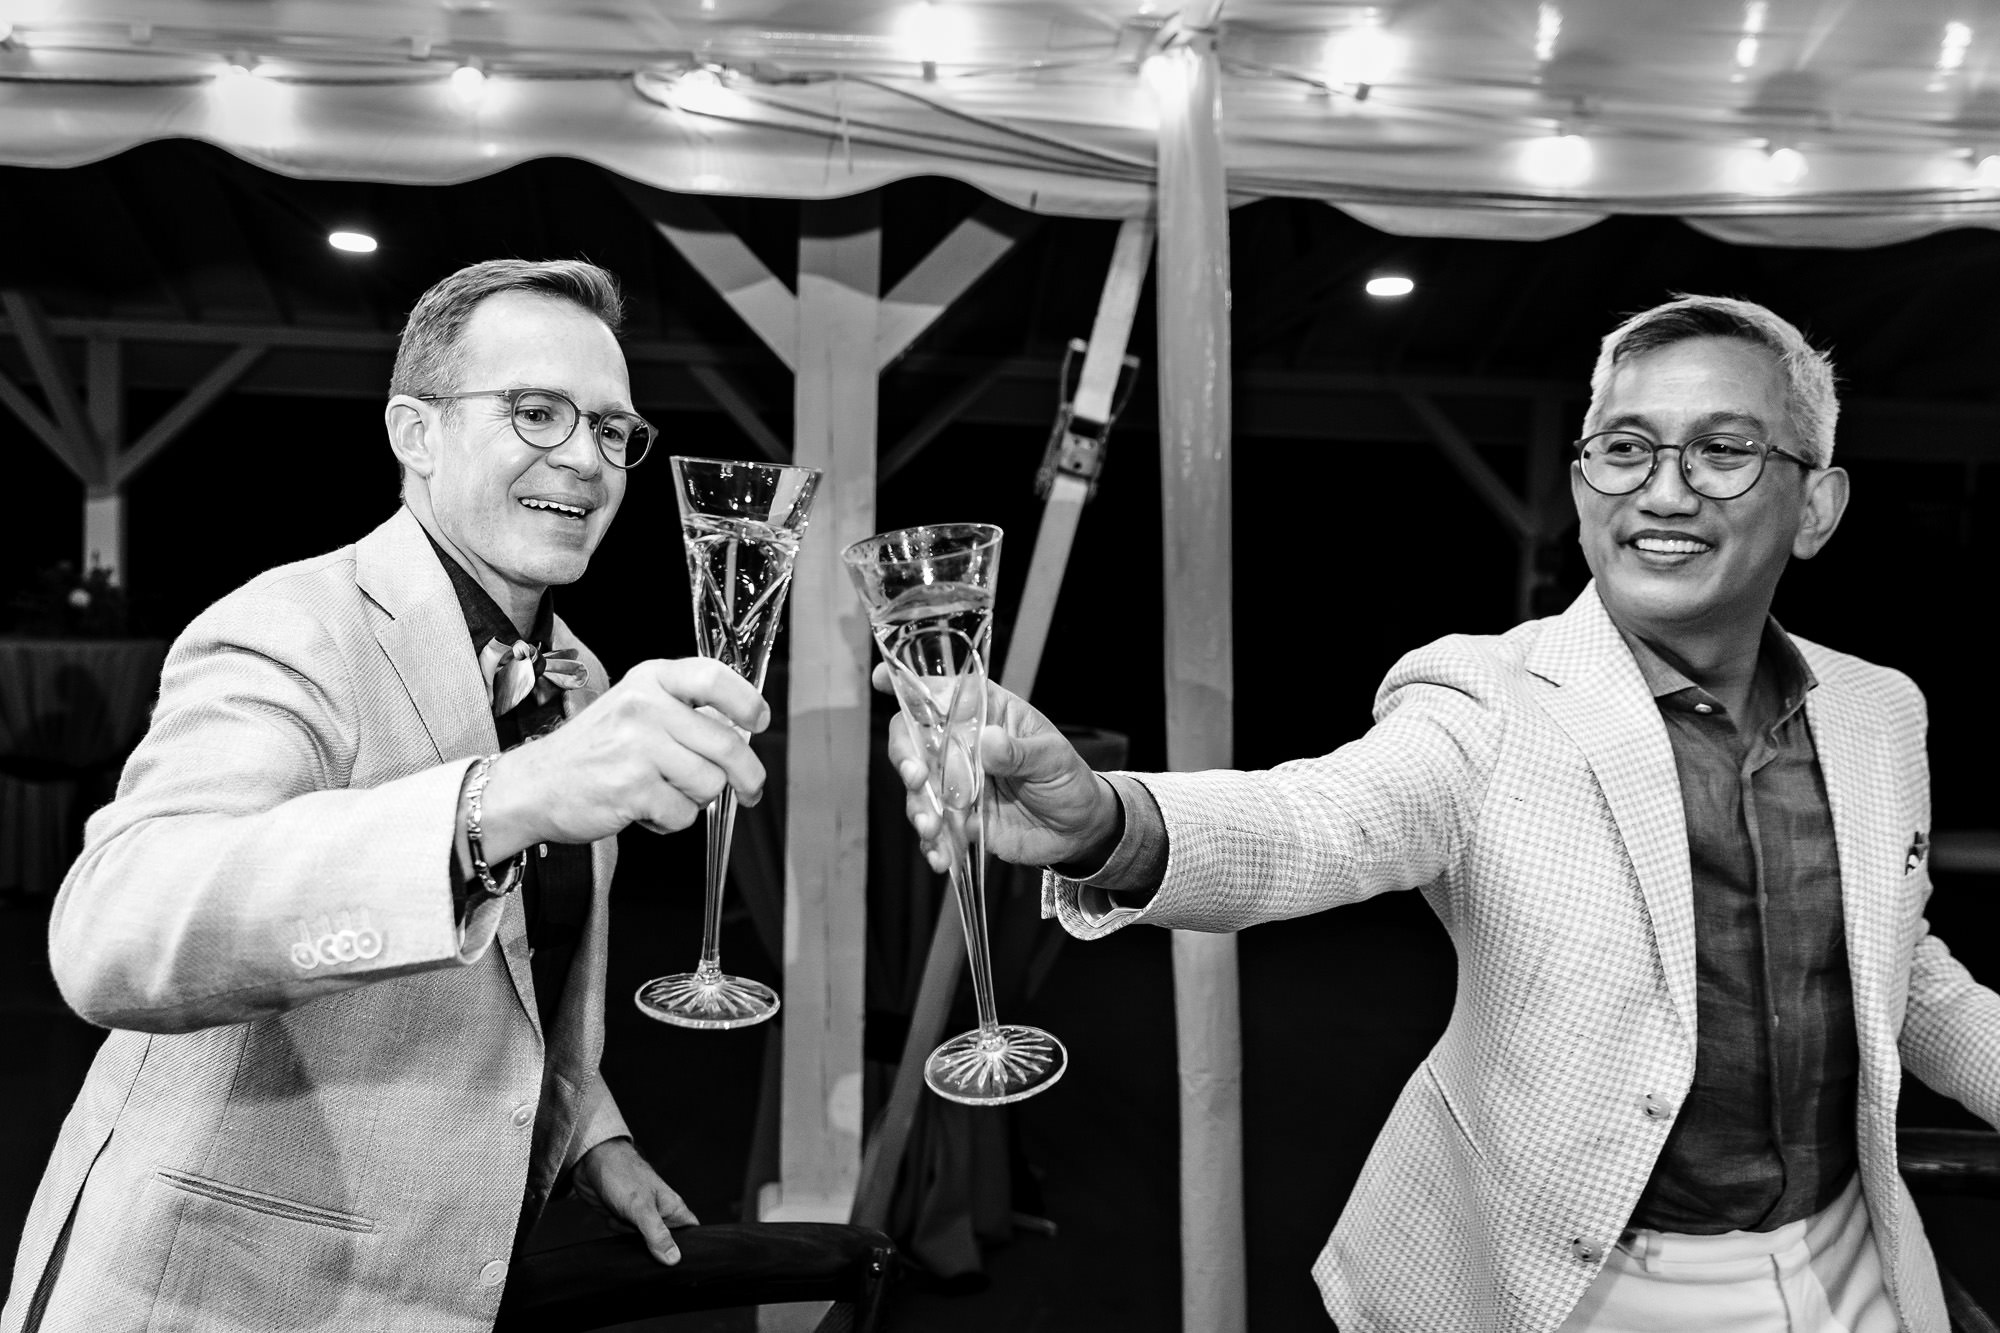 The grooms react to toasts during their wedding in Rangeley, Maine